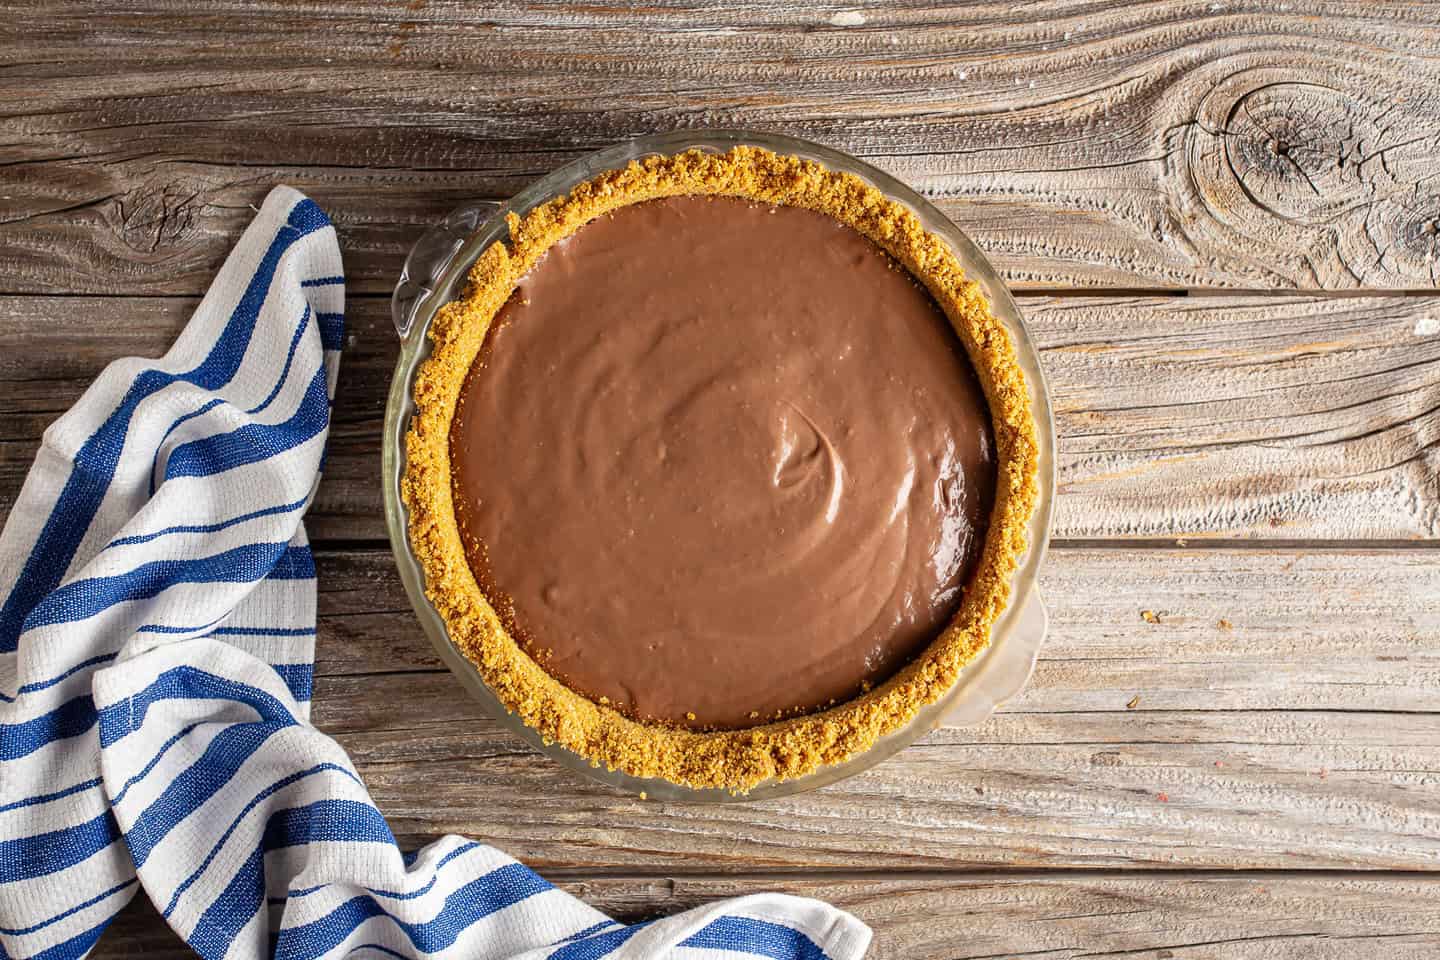 Homemade chocolate pudding in a Graham cracker crust.